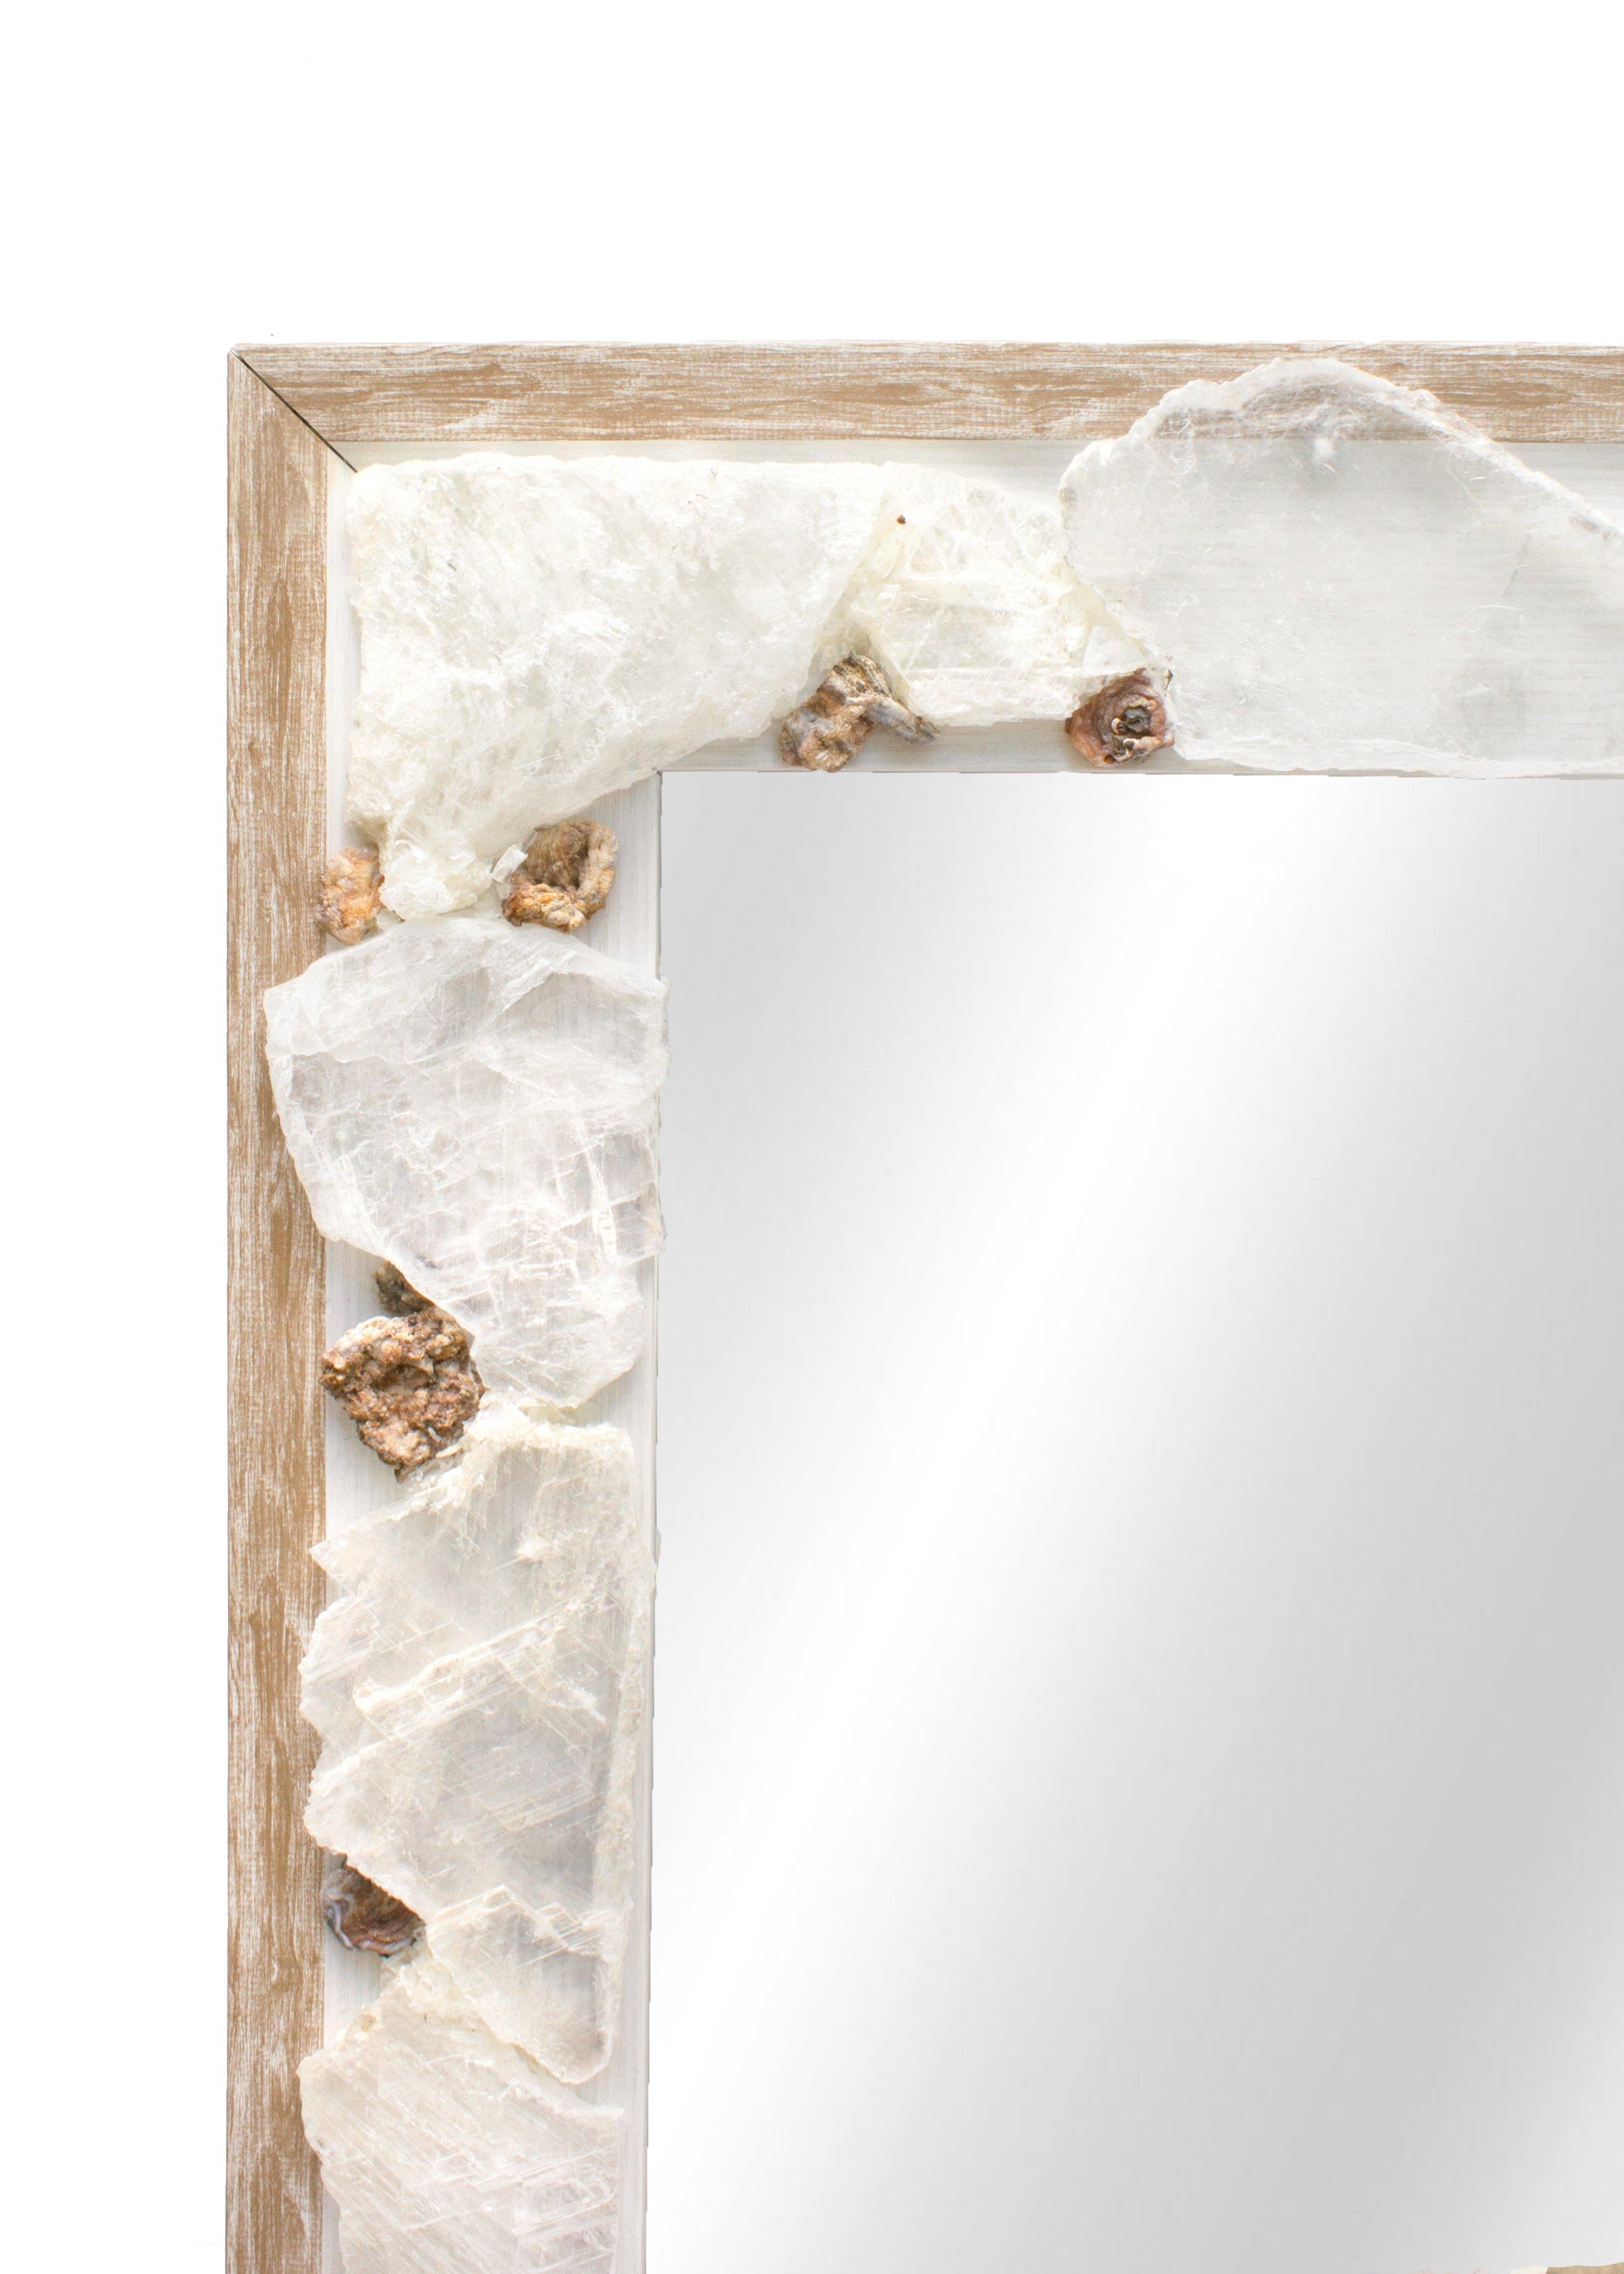 Selenite slice mirror with coordinating chalcedony rosettes.

Selenite is a crystallized form of gypsum. This crystalline form of selenite gypsum is comprised of striations which look like optical light fibers. Although selenite comes in many